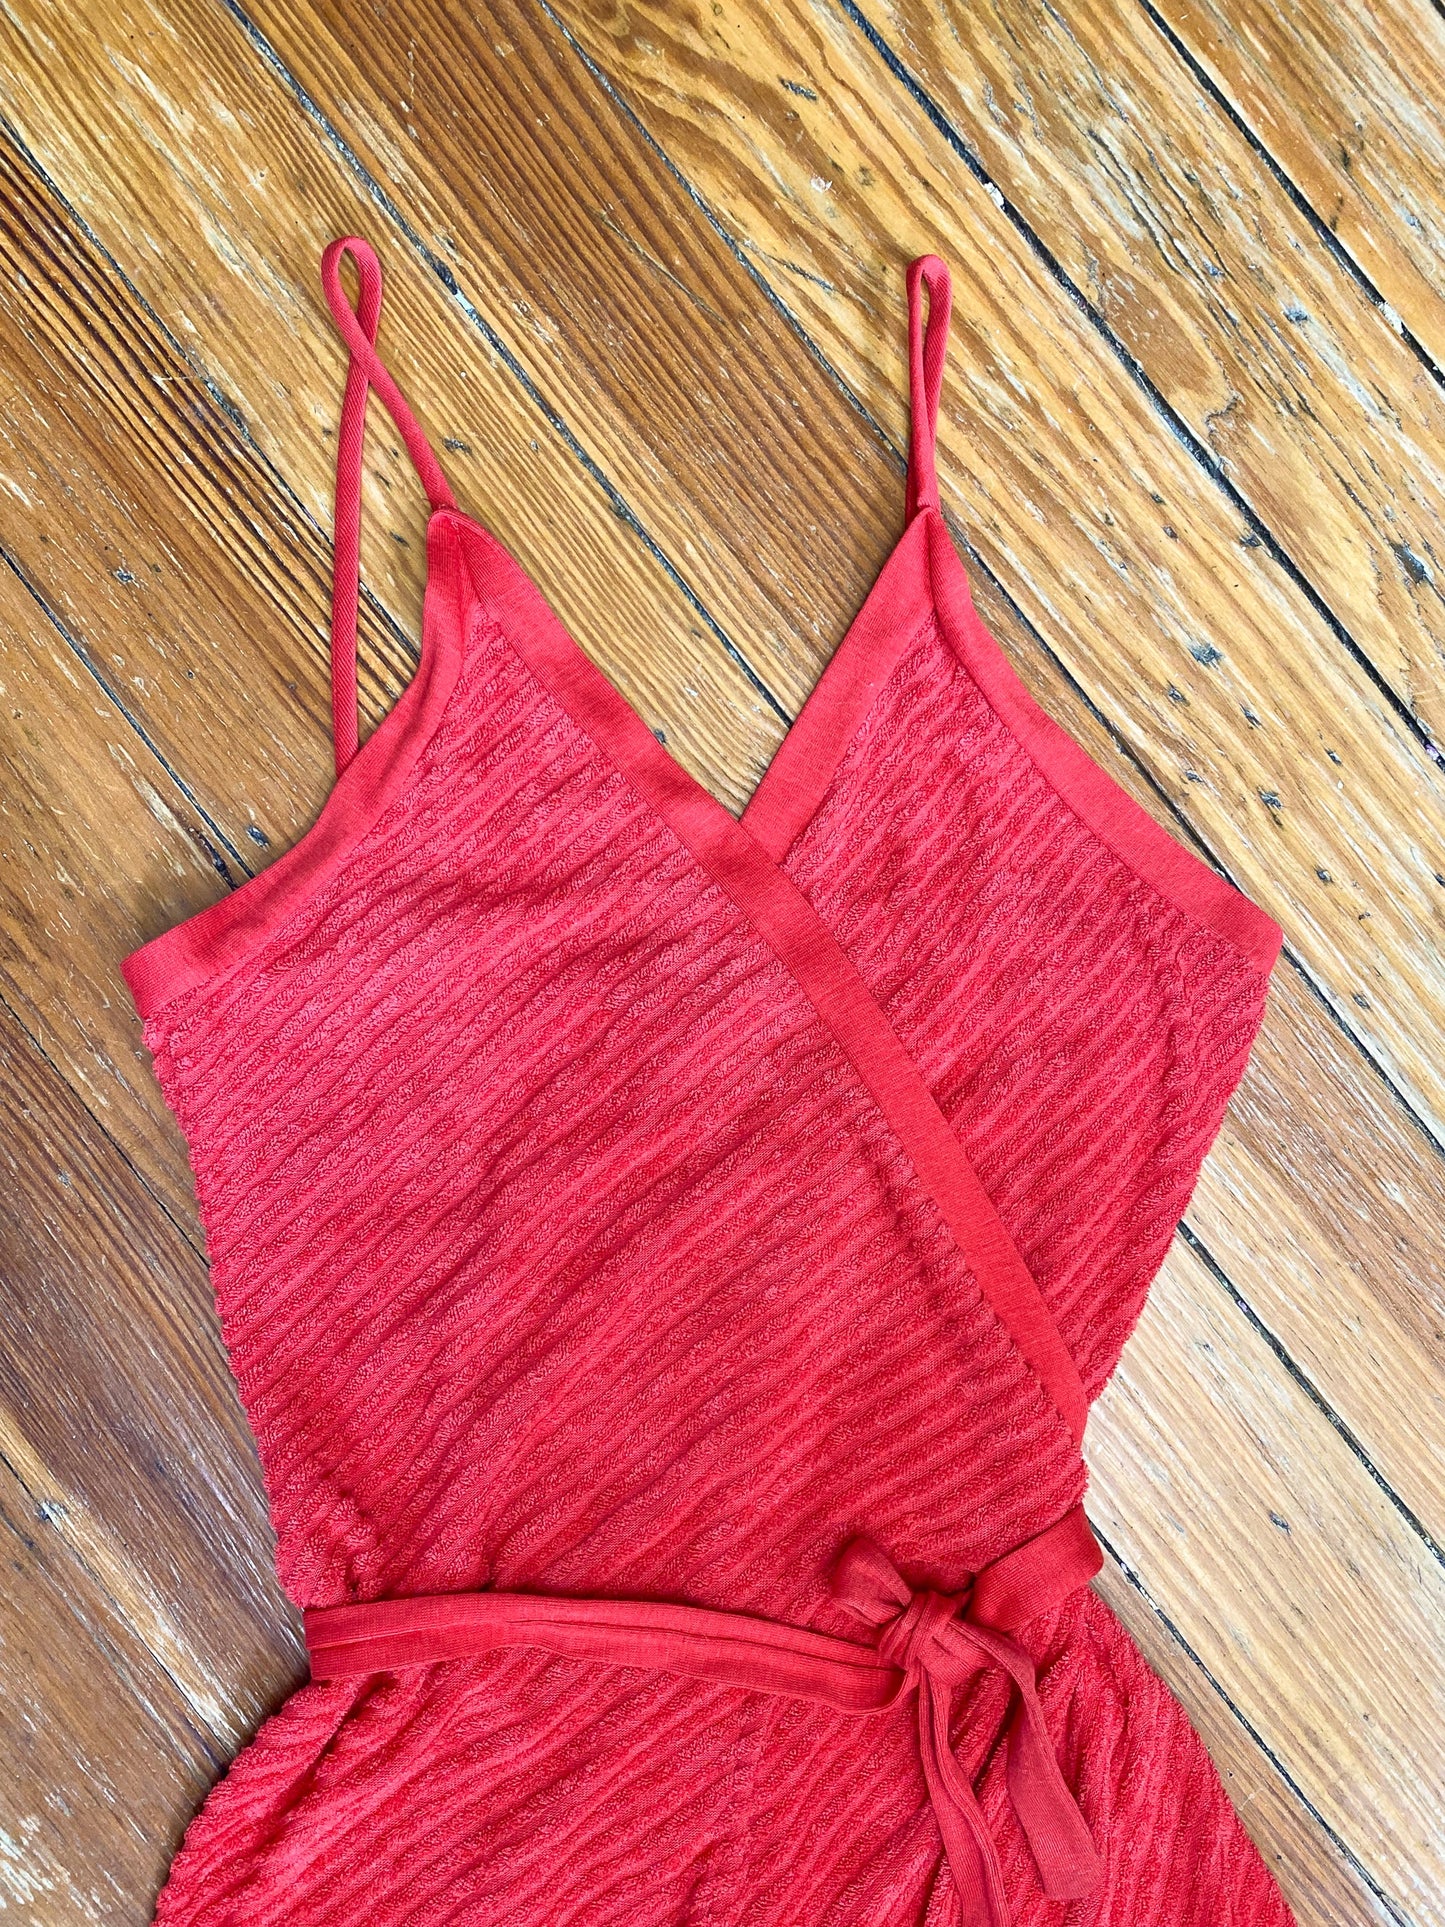 70's Red Terry Cloth Beach Cover up Playsuit